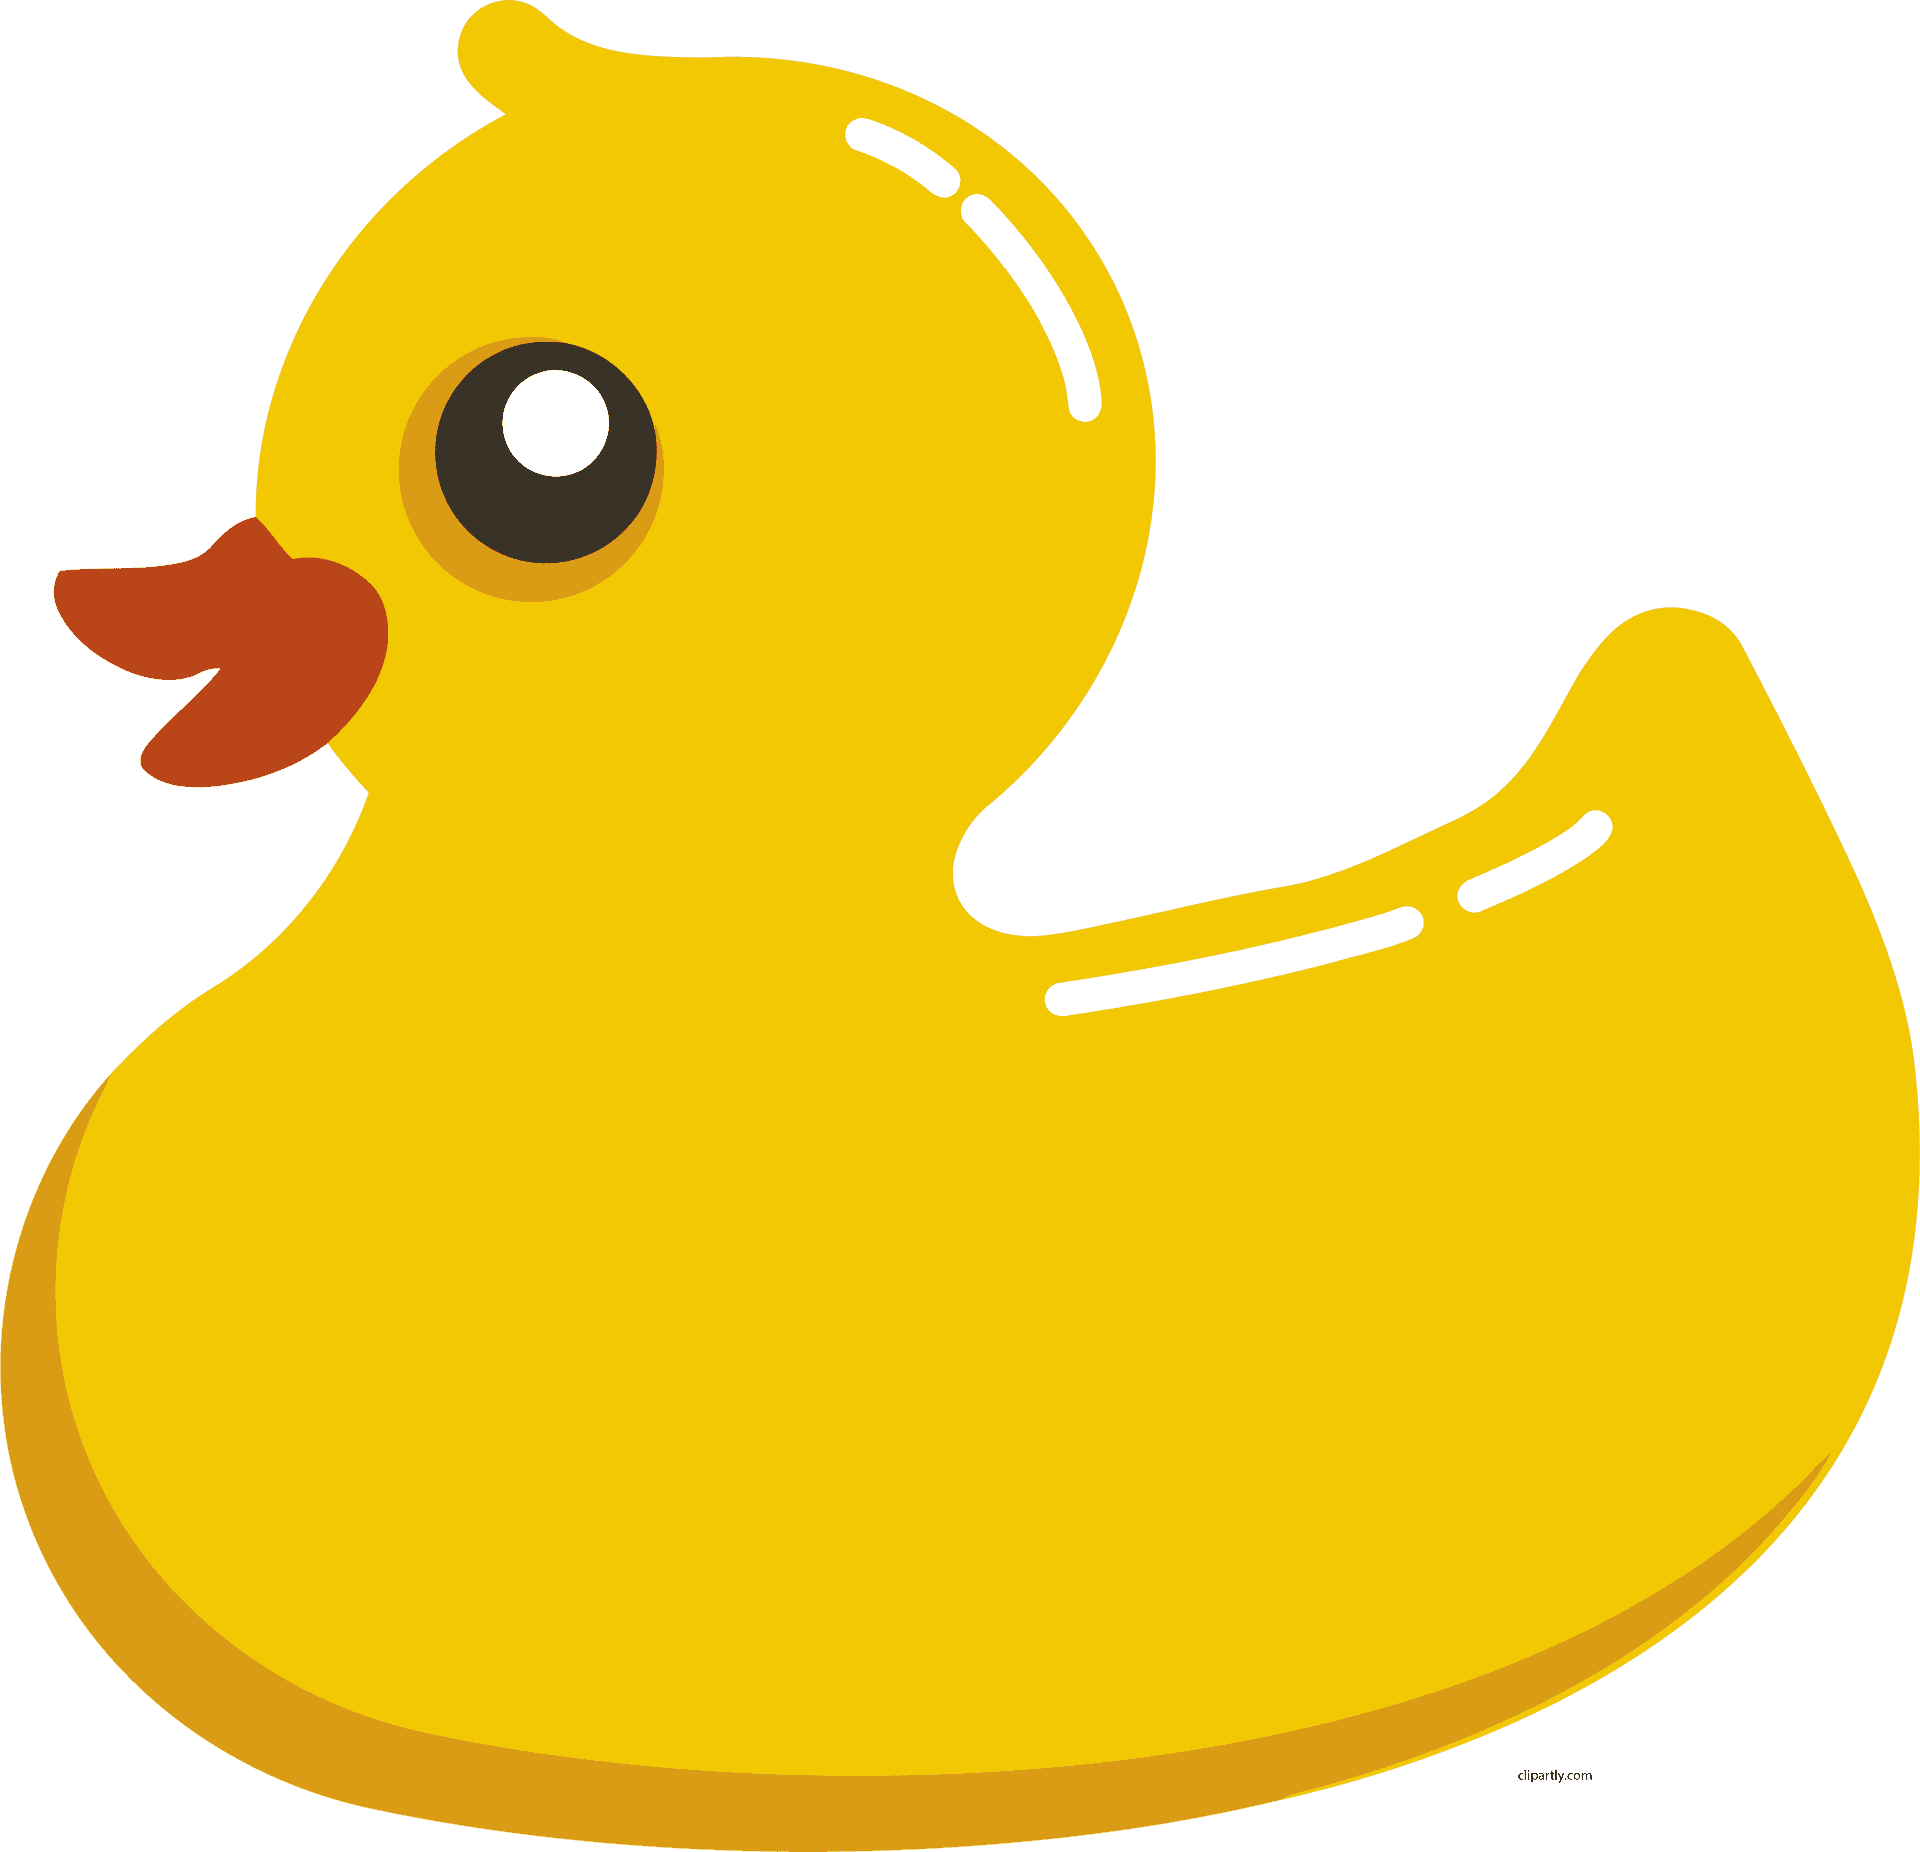 Yellow Rubber Duck Illustration PNG image